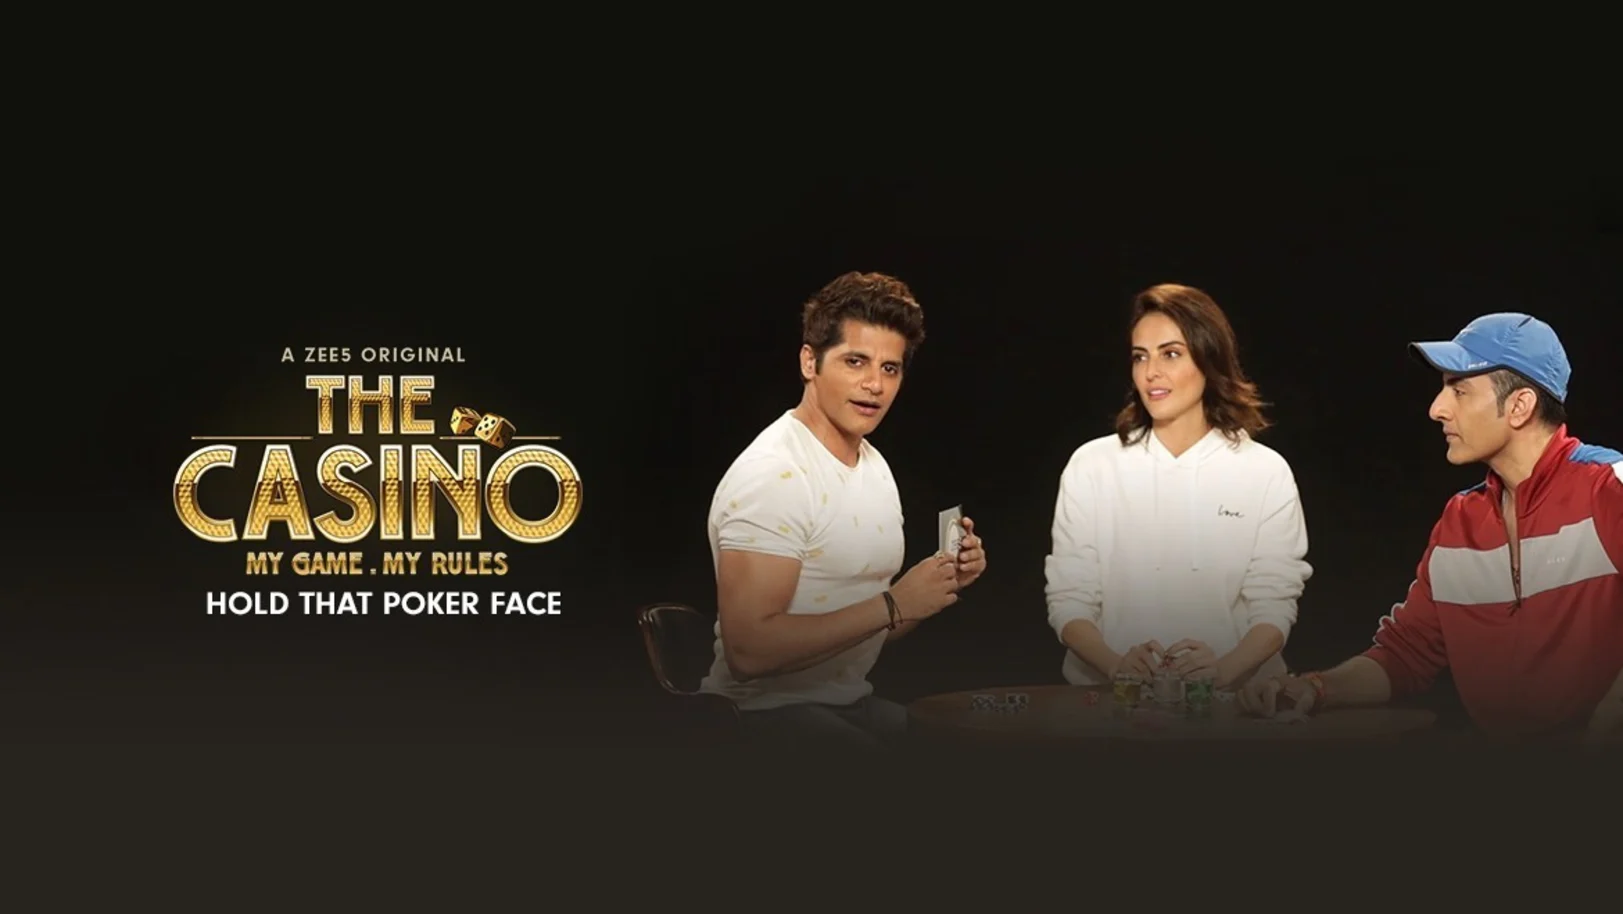 Hold That Poker Face Ft. The Casino Team 2nd July 2020 Webisode